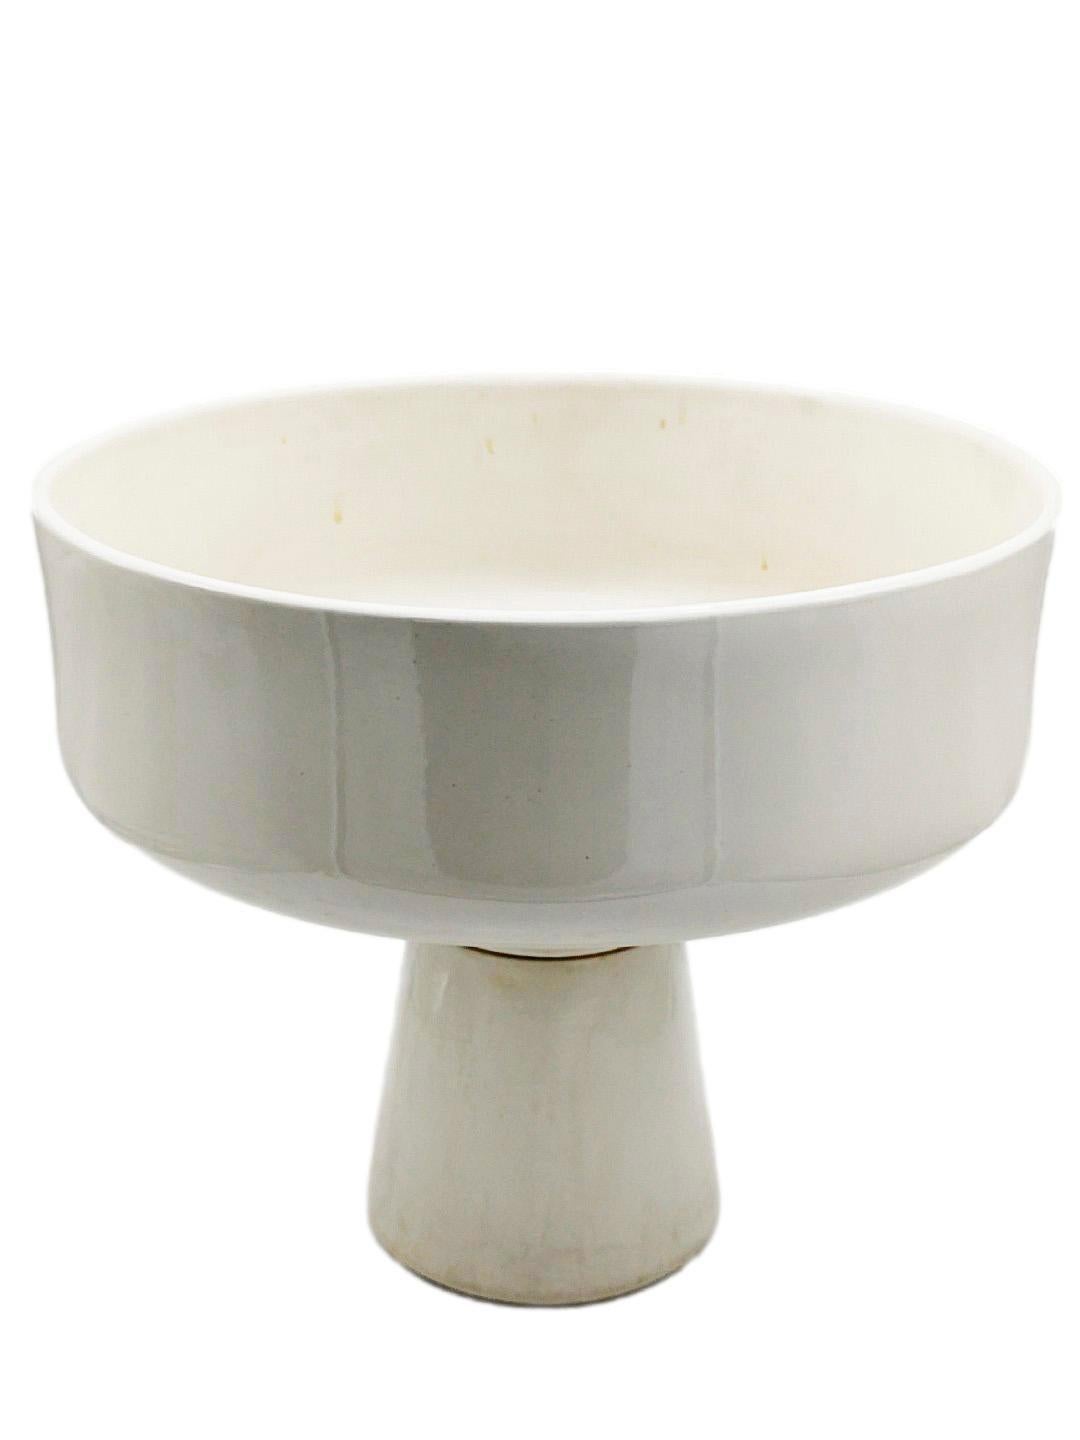 Large floor-standing planter in white porcelain stoneware, designed by Angelo Mangiarotti, composed of two separable pieces, a circular vase and a conical base. Embossed mark of the manufacturer Brambilla. 1965s. Good condition, some signs of ageing